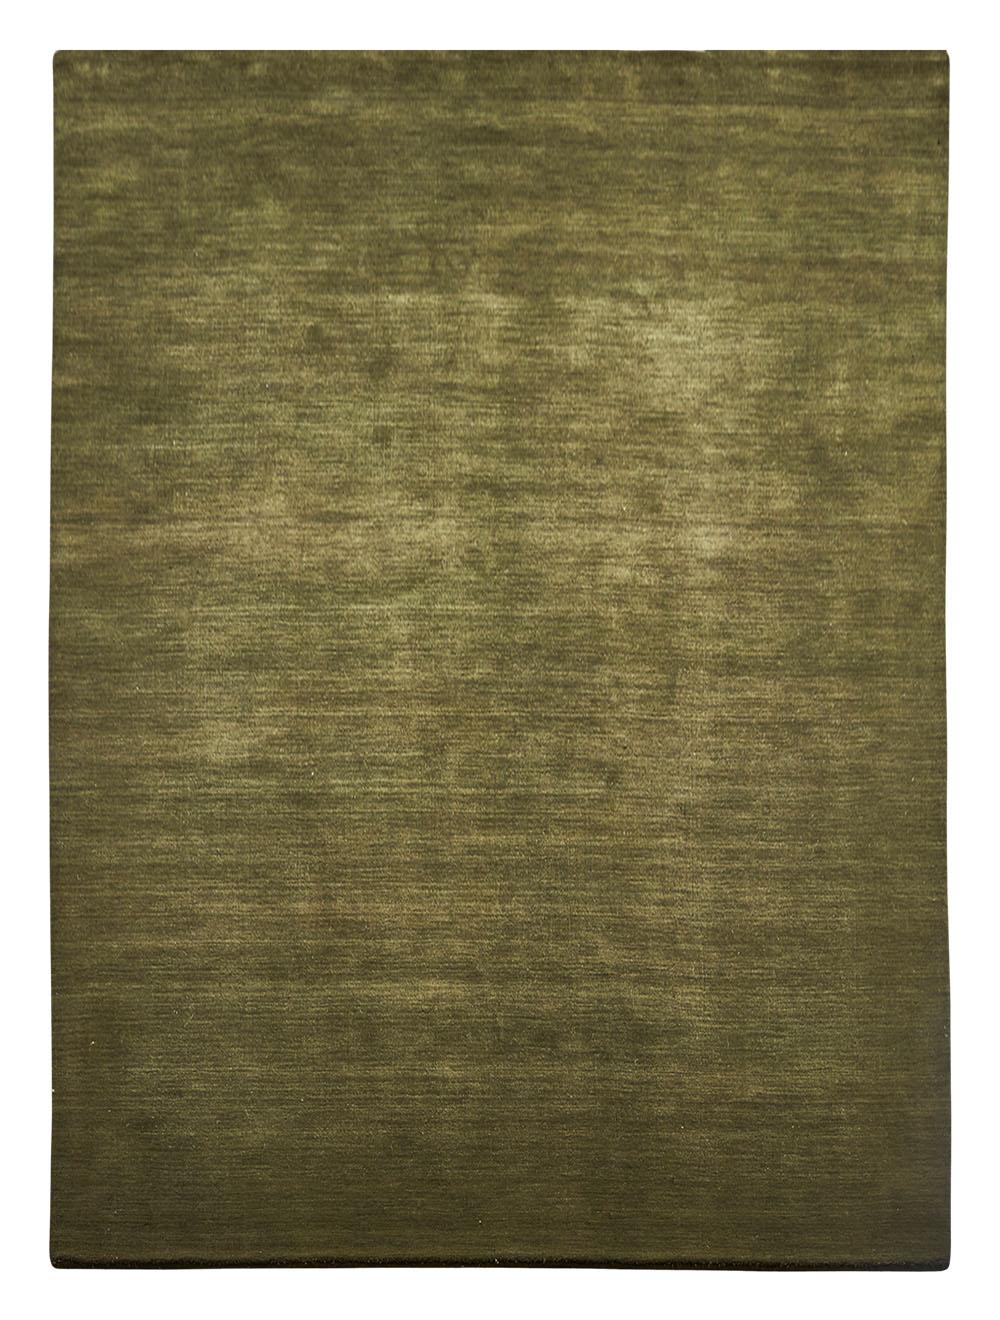 Moss Green Earth Carpet by Massimo Copenhagen
Handwoven
Materials: 100% New Zealand Wool
Dimensions: W 300 x H 400 cm
Available colors: Verte Grey, Moss Green, Blush, Sea Green, and Charcoal.
Other dimensions are available: 140x200 cm, 170x240